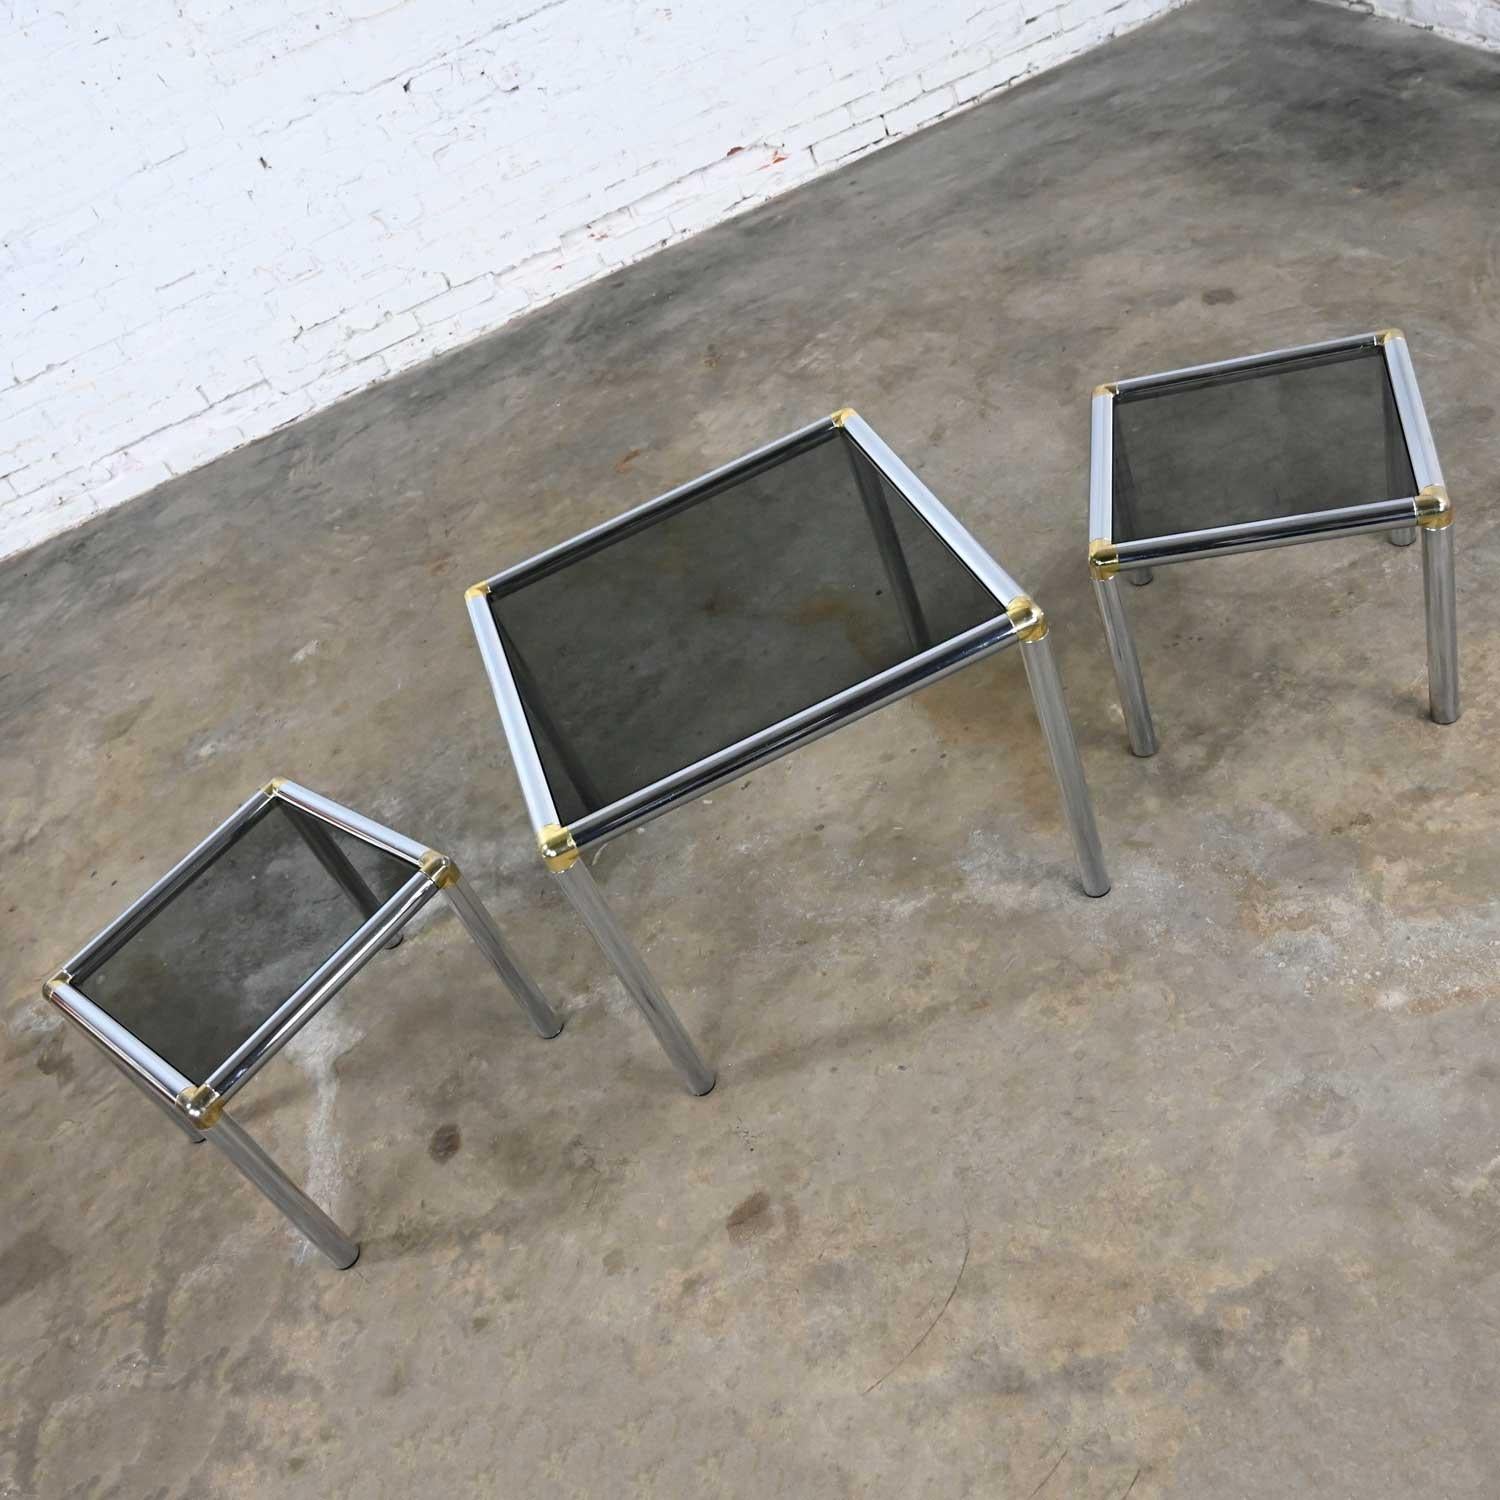 Awesome trio of matching MCM, Mid-Century Modern, to modern tubular chrome frame tables, one cocktail and two end tables with brass accents and smoke glass tops. Wonderful condition, keeping in mind that these are vintage and not new so will have